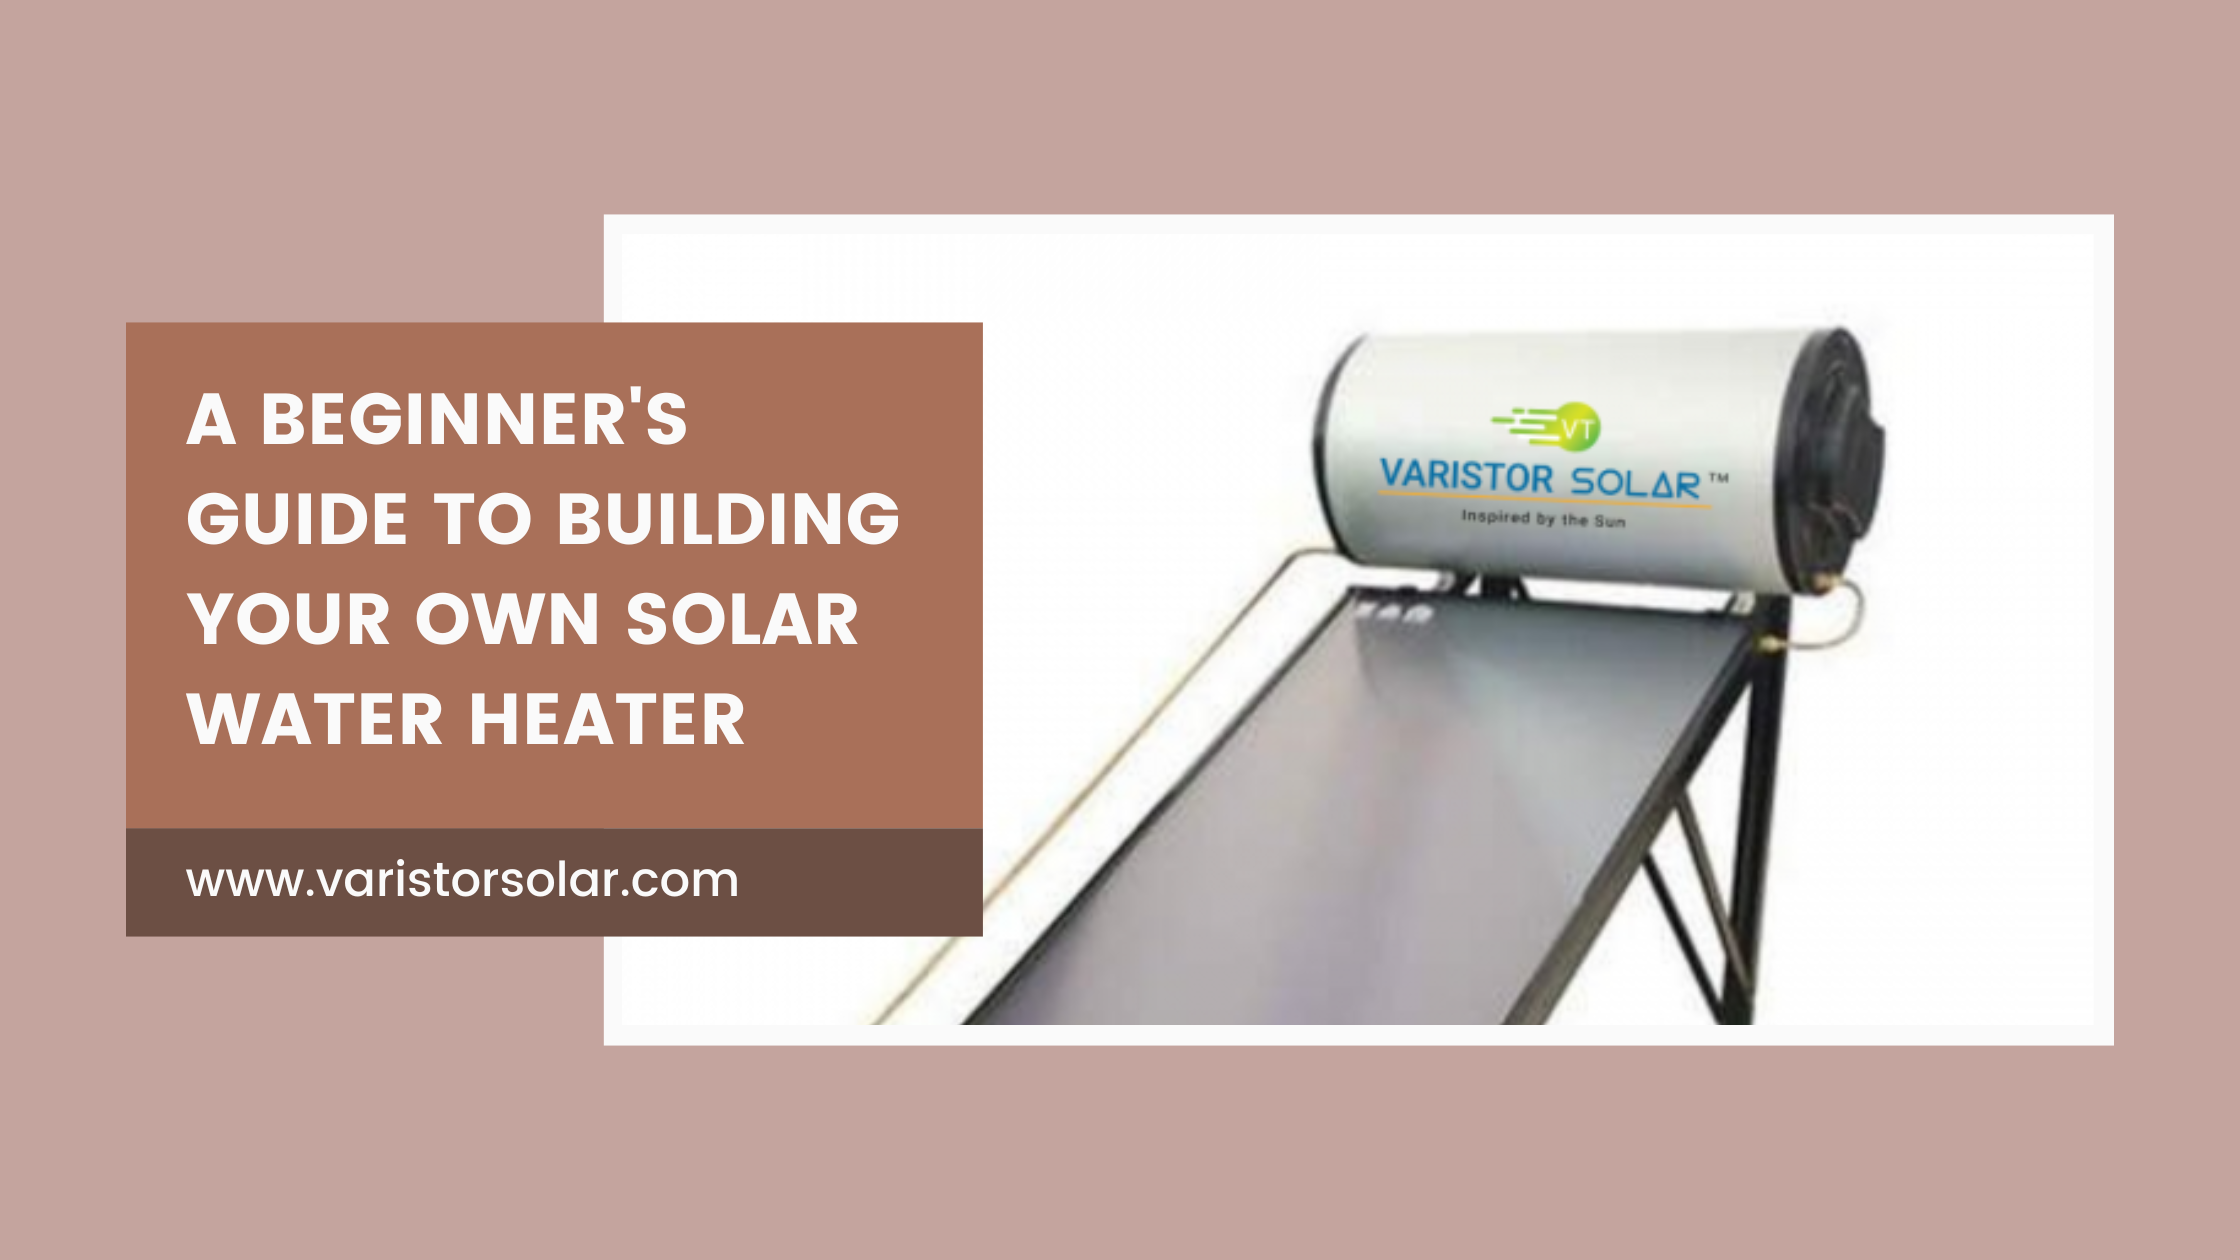 A Beginner's Guide to Building Your Own Solar Water Heater